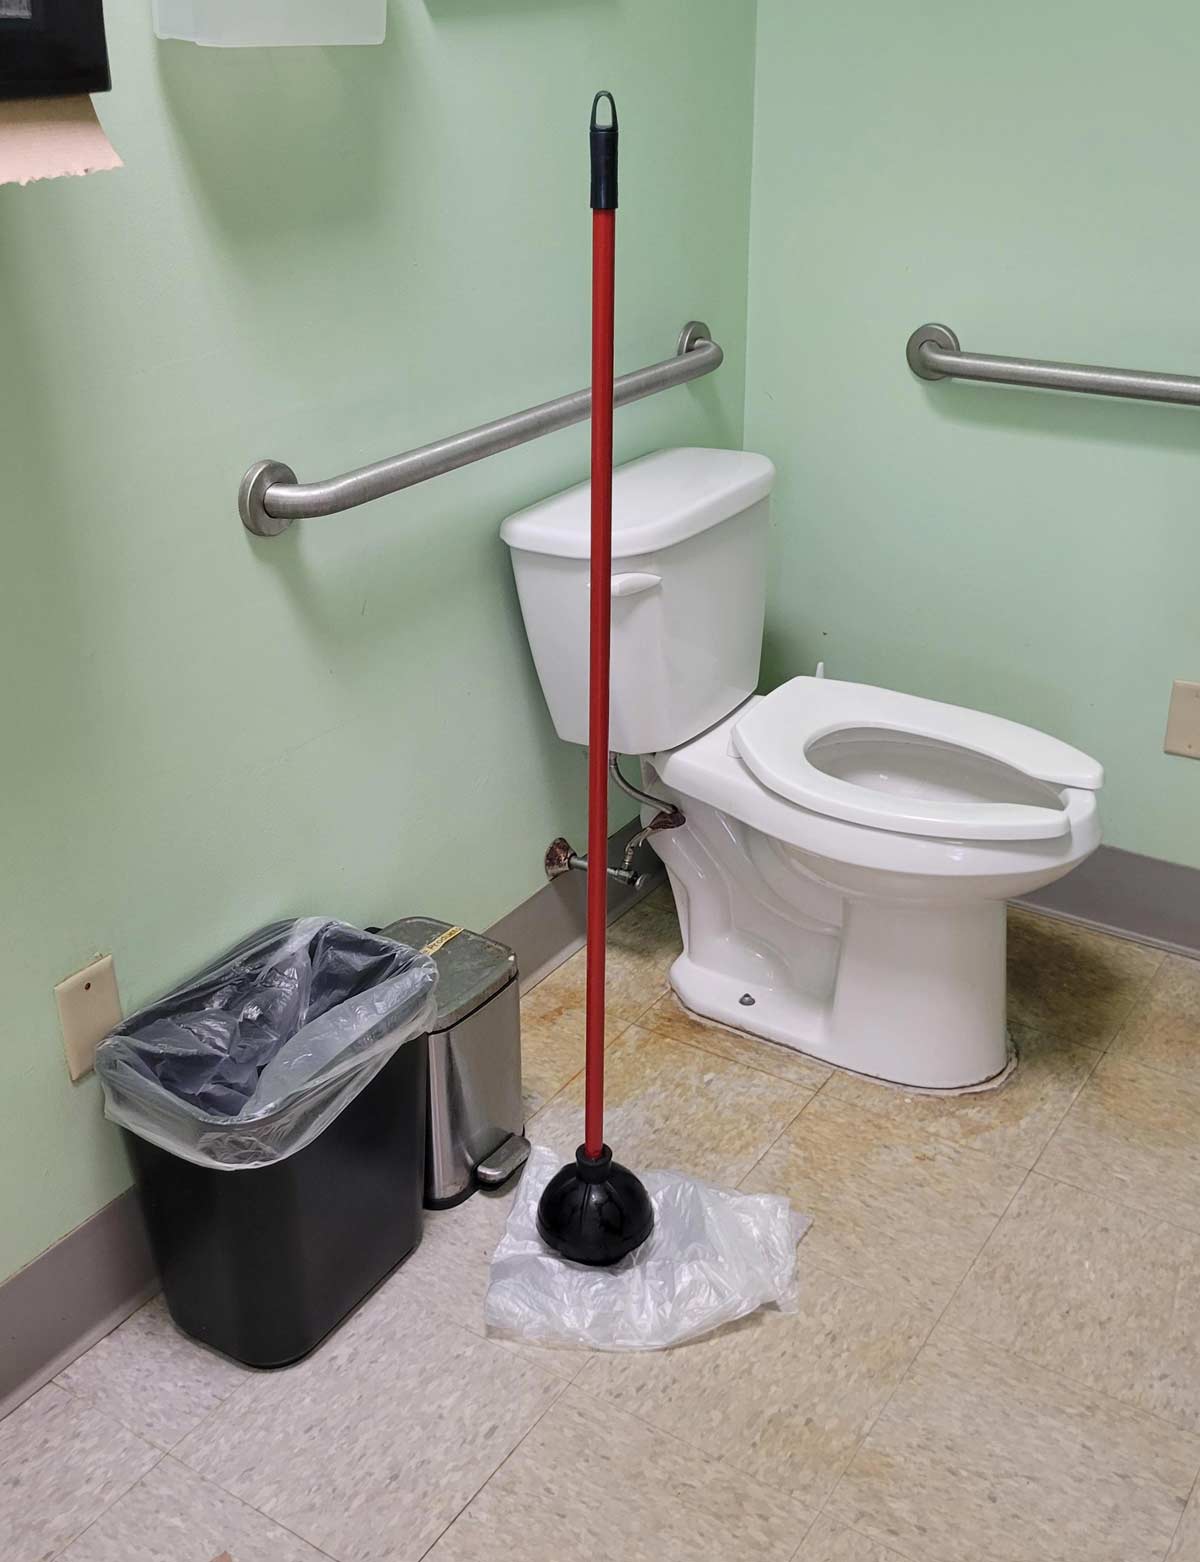 This plunger I saw today